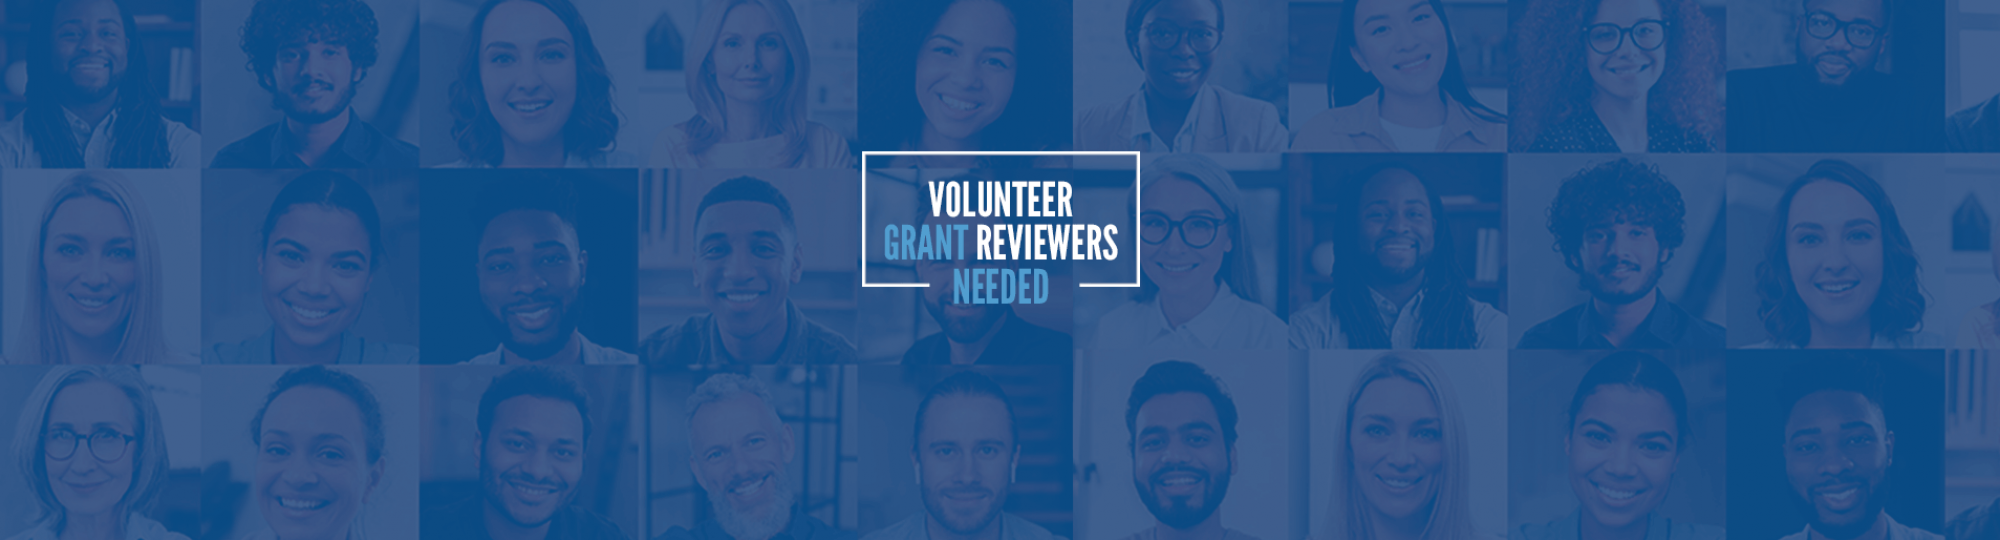 Volunteer Grant Reviewers Needed United Way of Southeast Louisiana